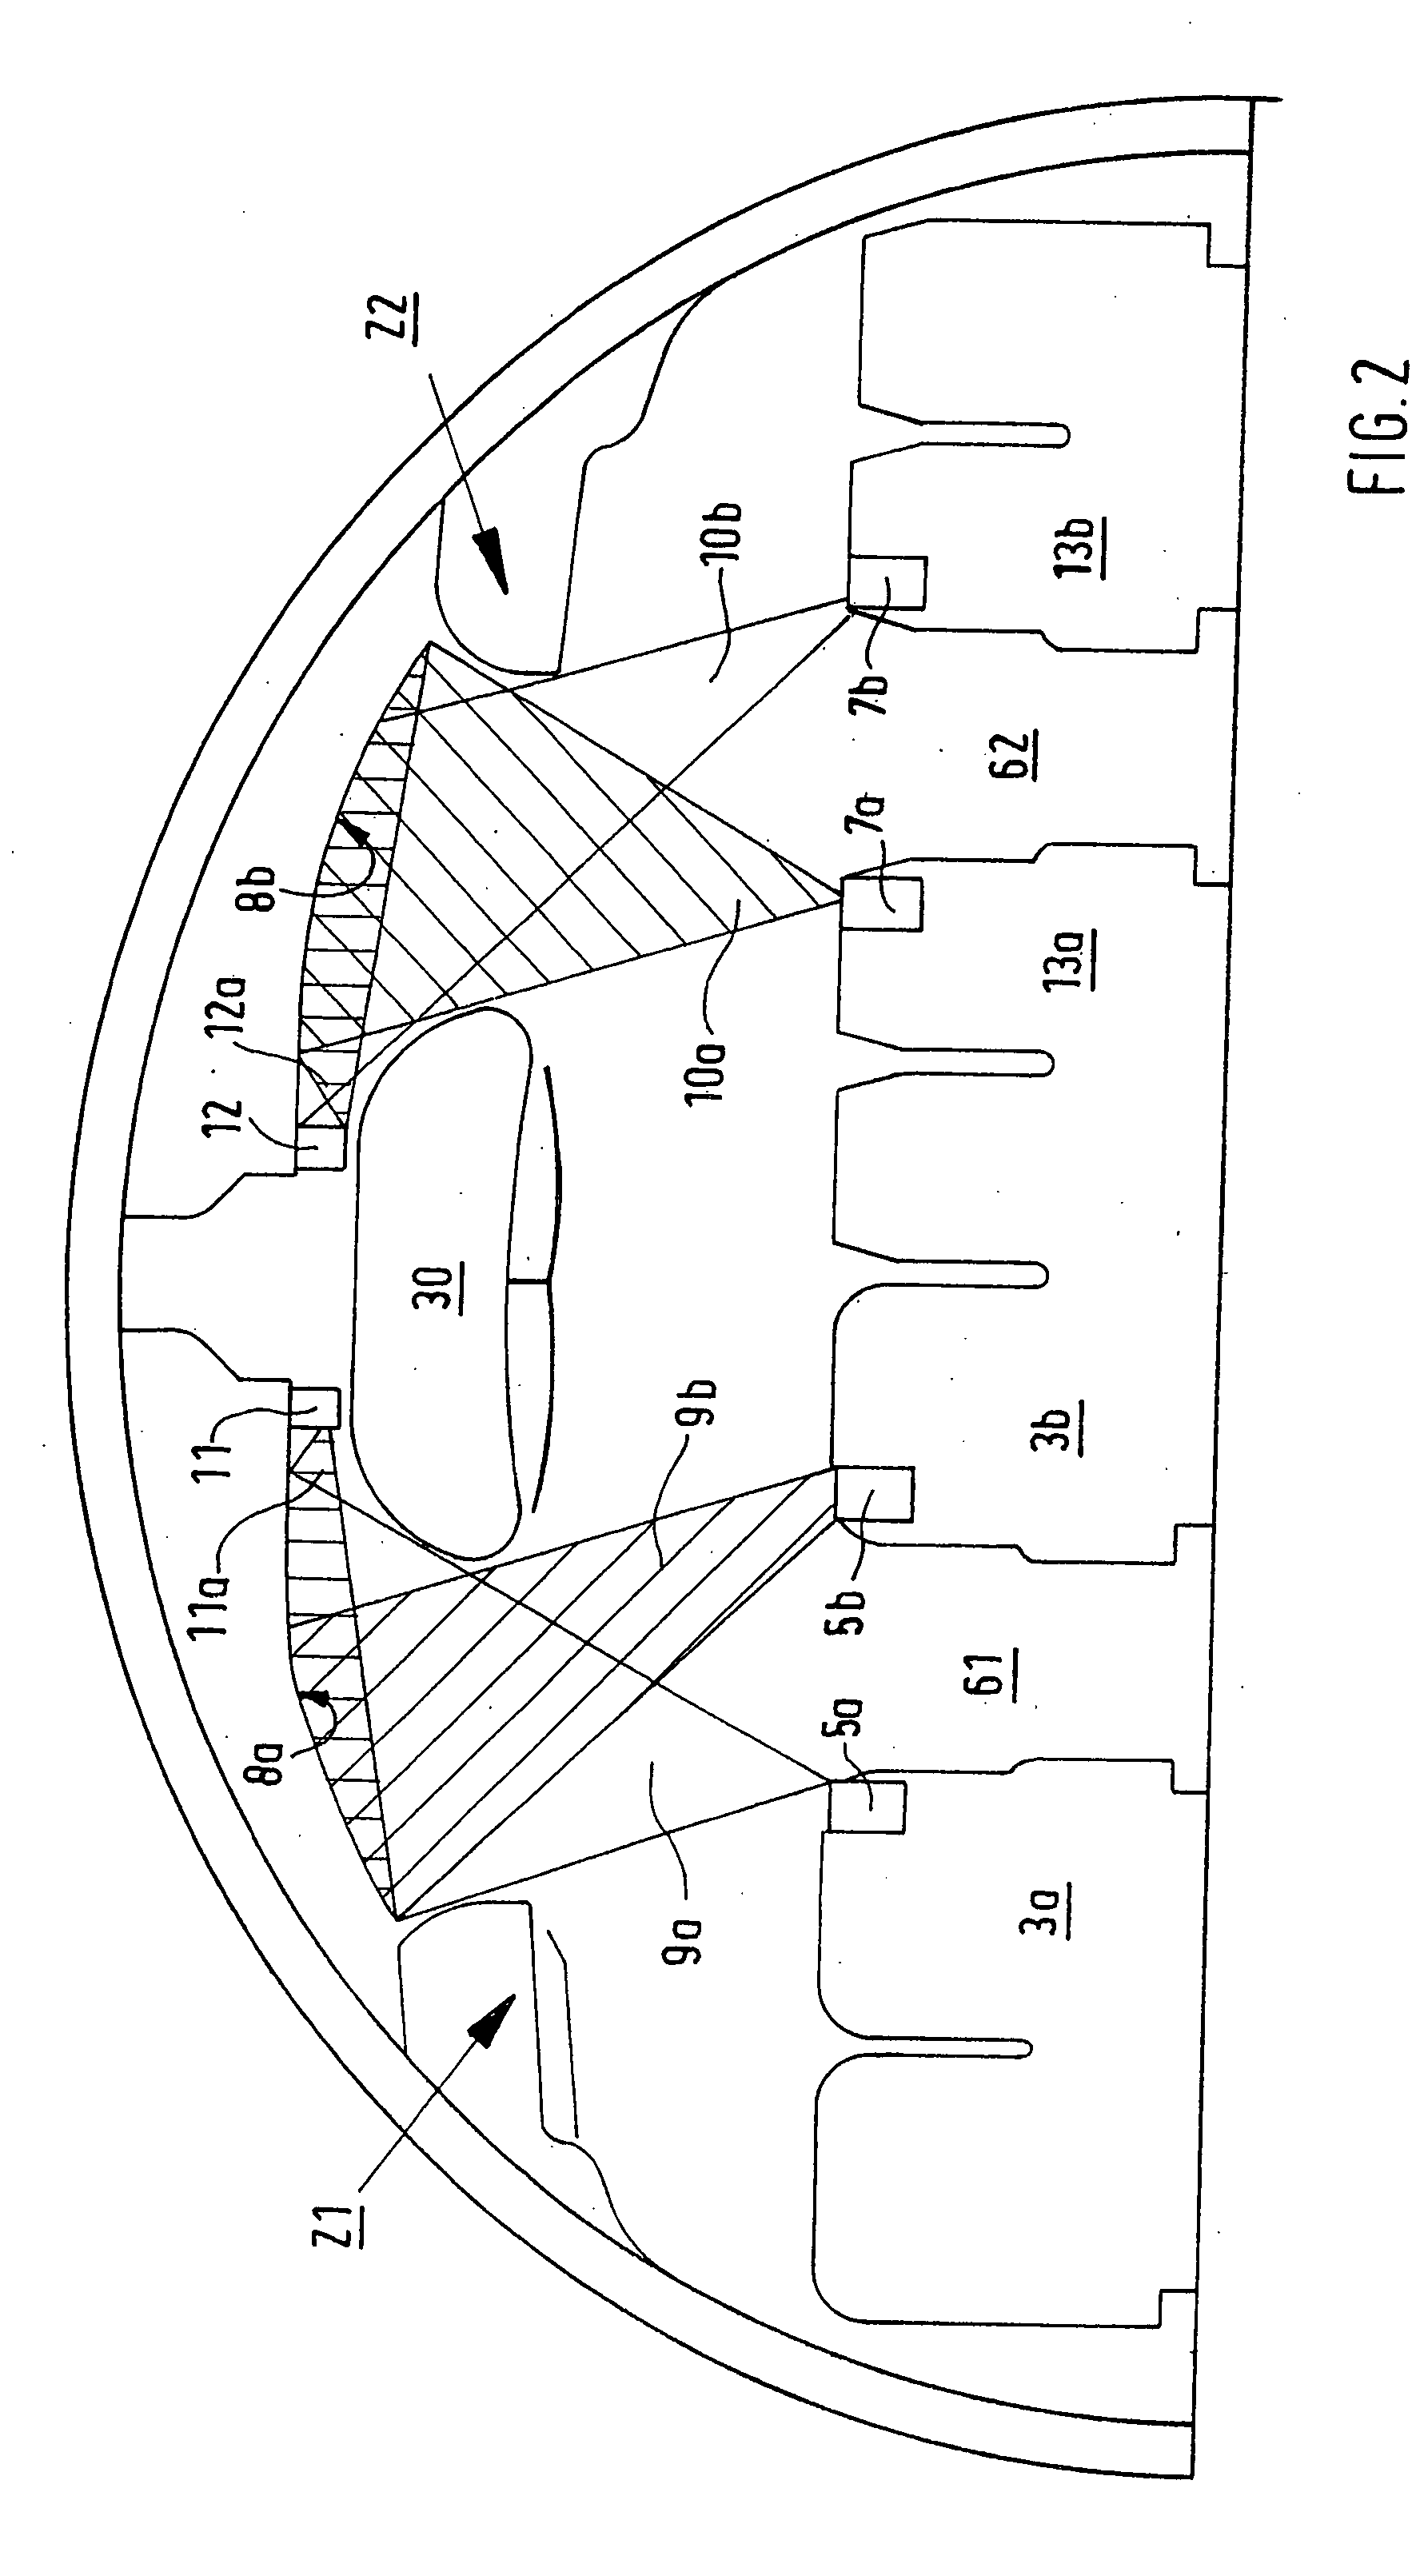 Indirect Optical Free-Space Communications System and Method for the Broadband Transmission of Hight-Speed Data